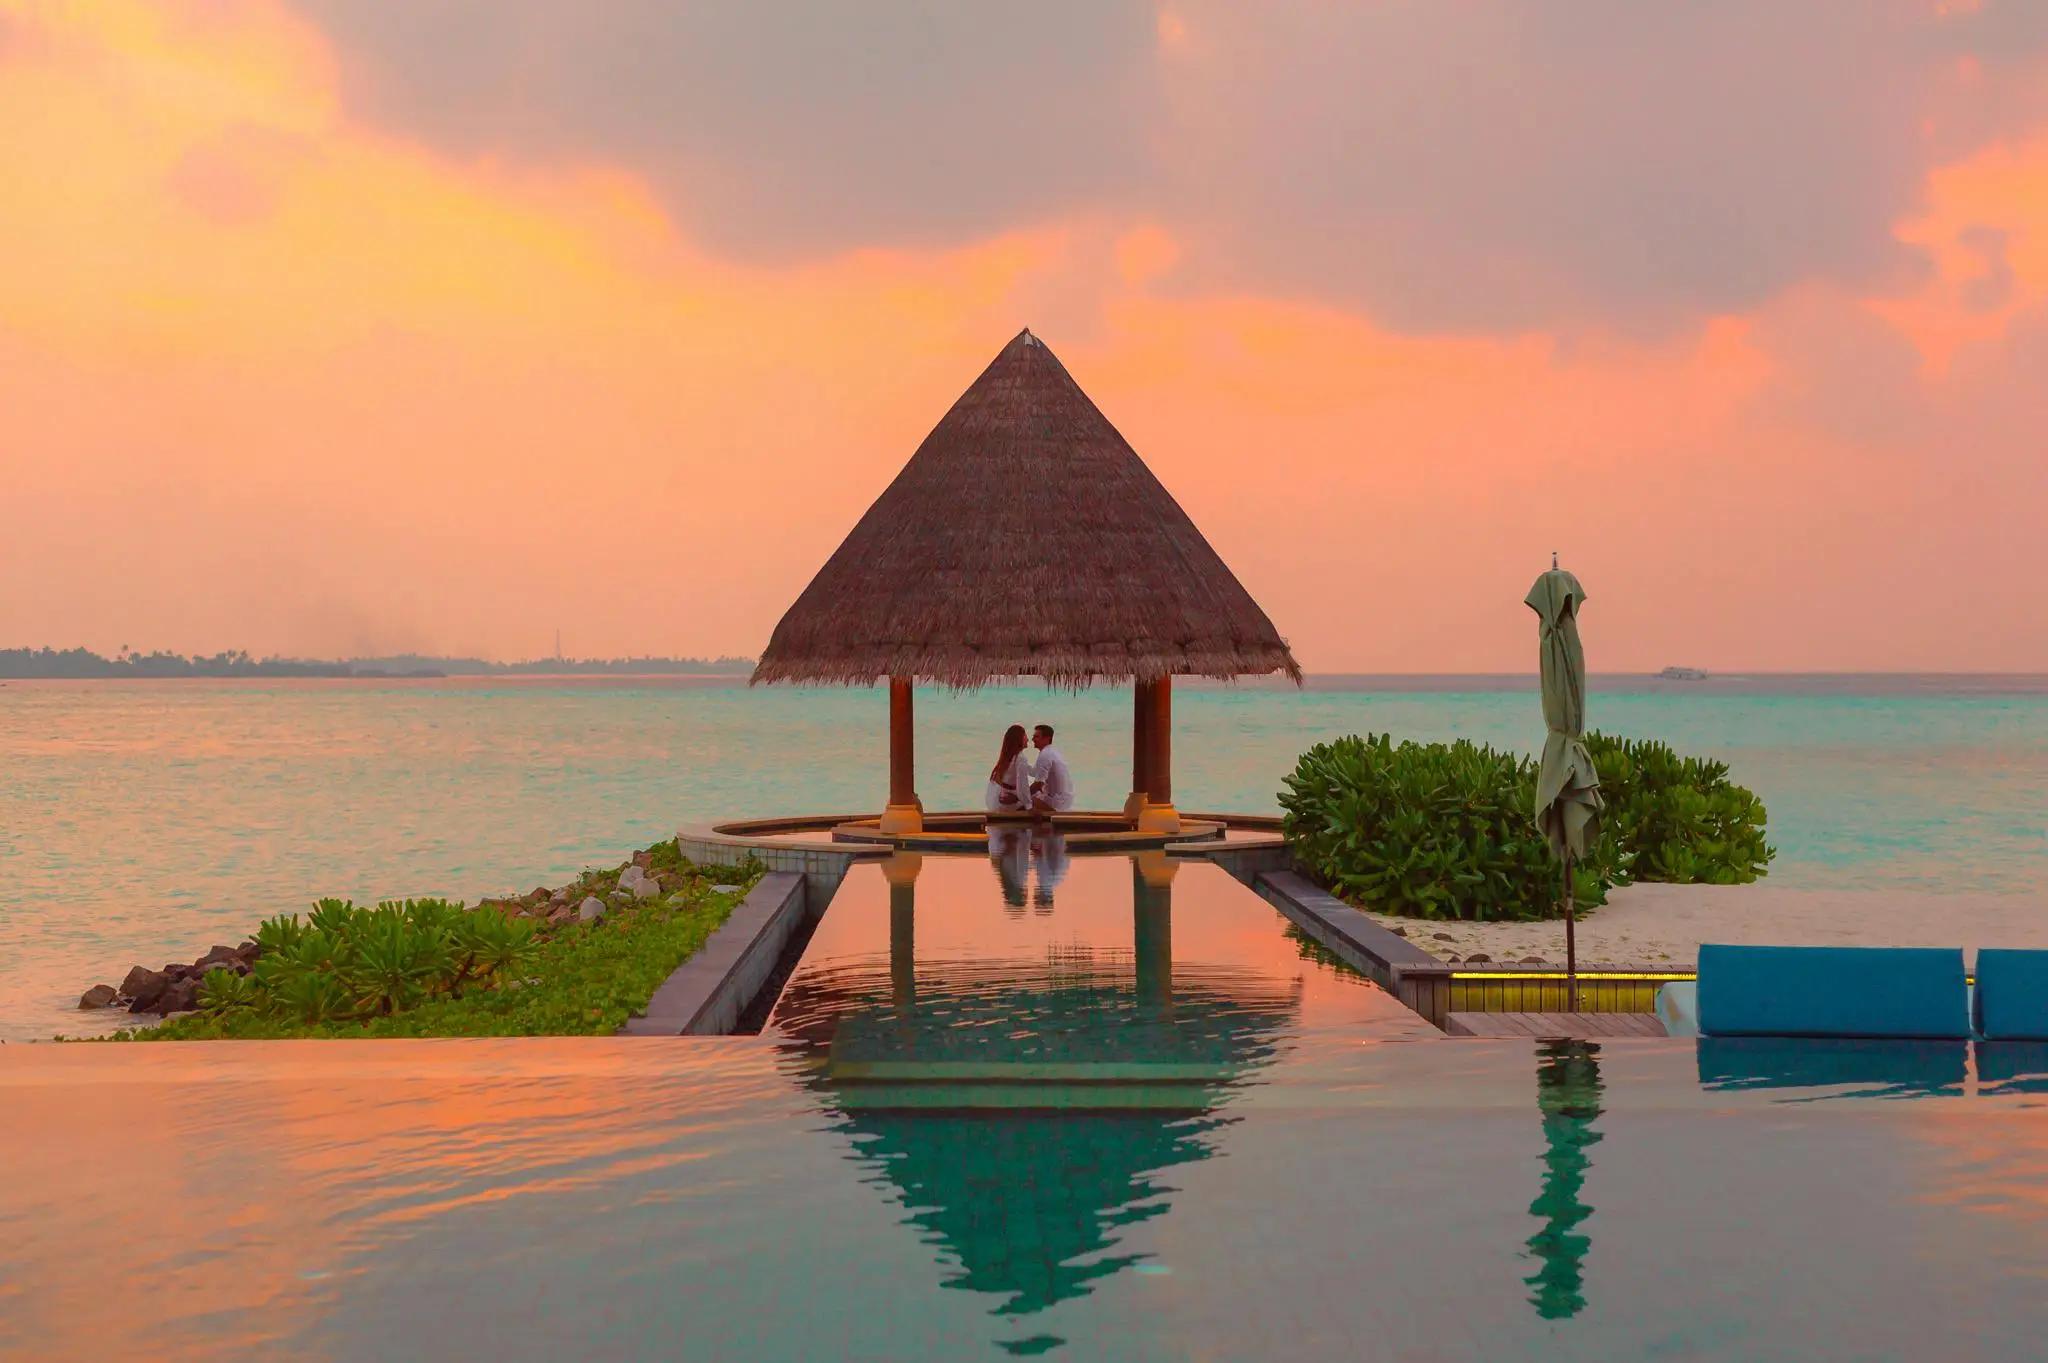 Destination Honeymoon Packing Guide: Essentials for Your Dream Romantic Getaway Image